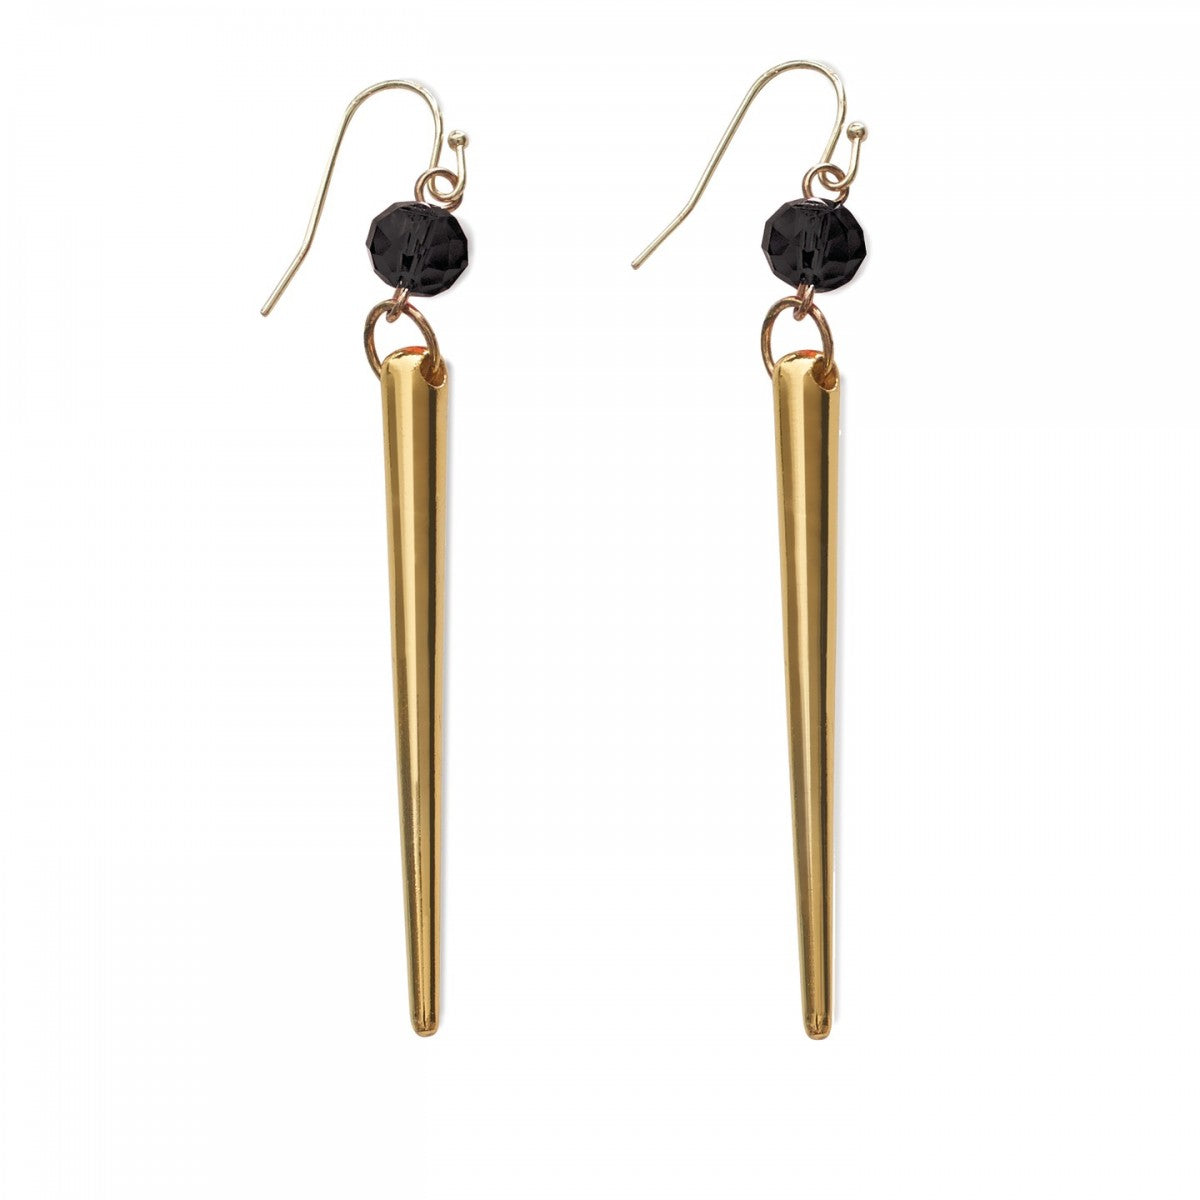 Waterford Rebel Trixie Gold Drop Earring, Pair